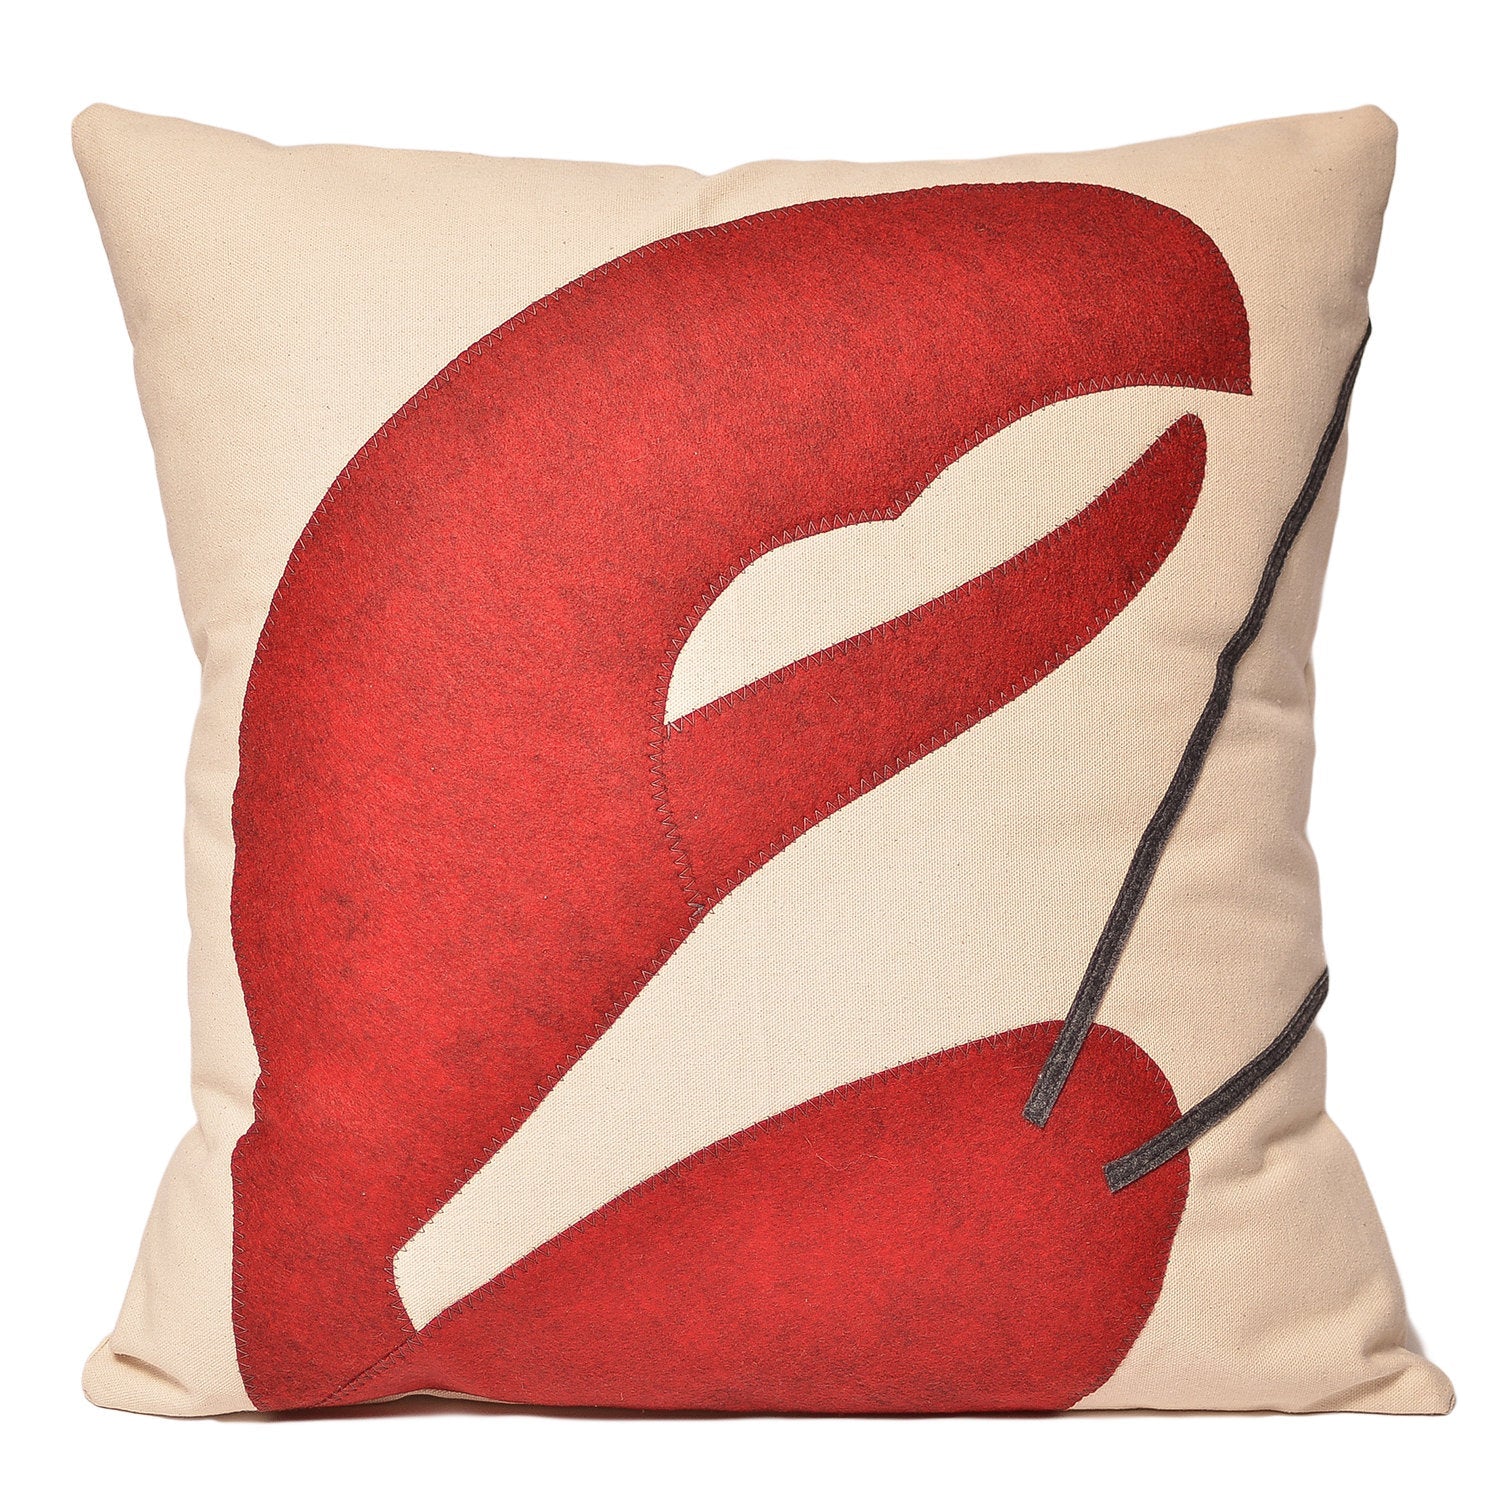 21" The Big Red Lobster Pillow